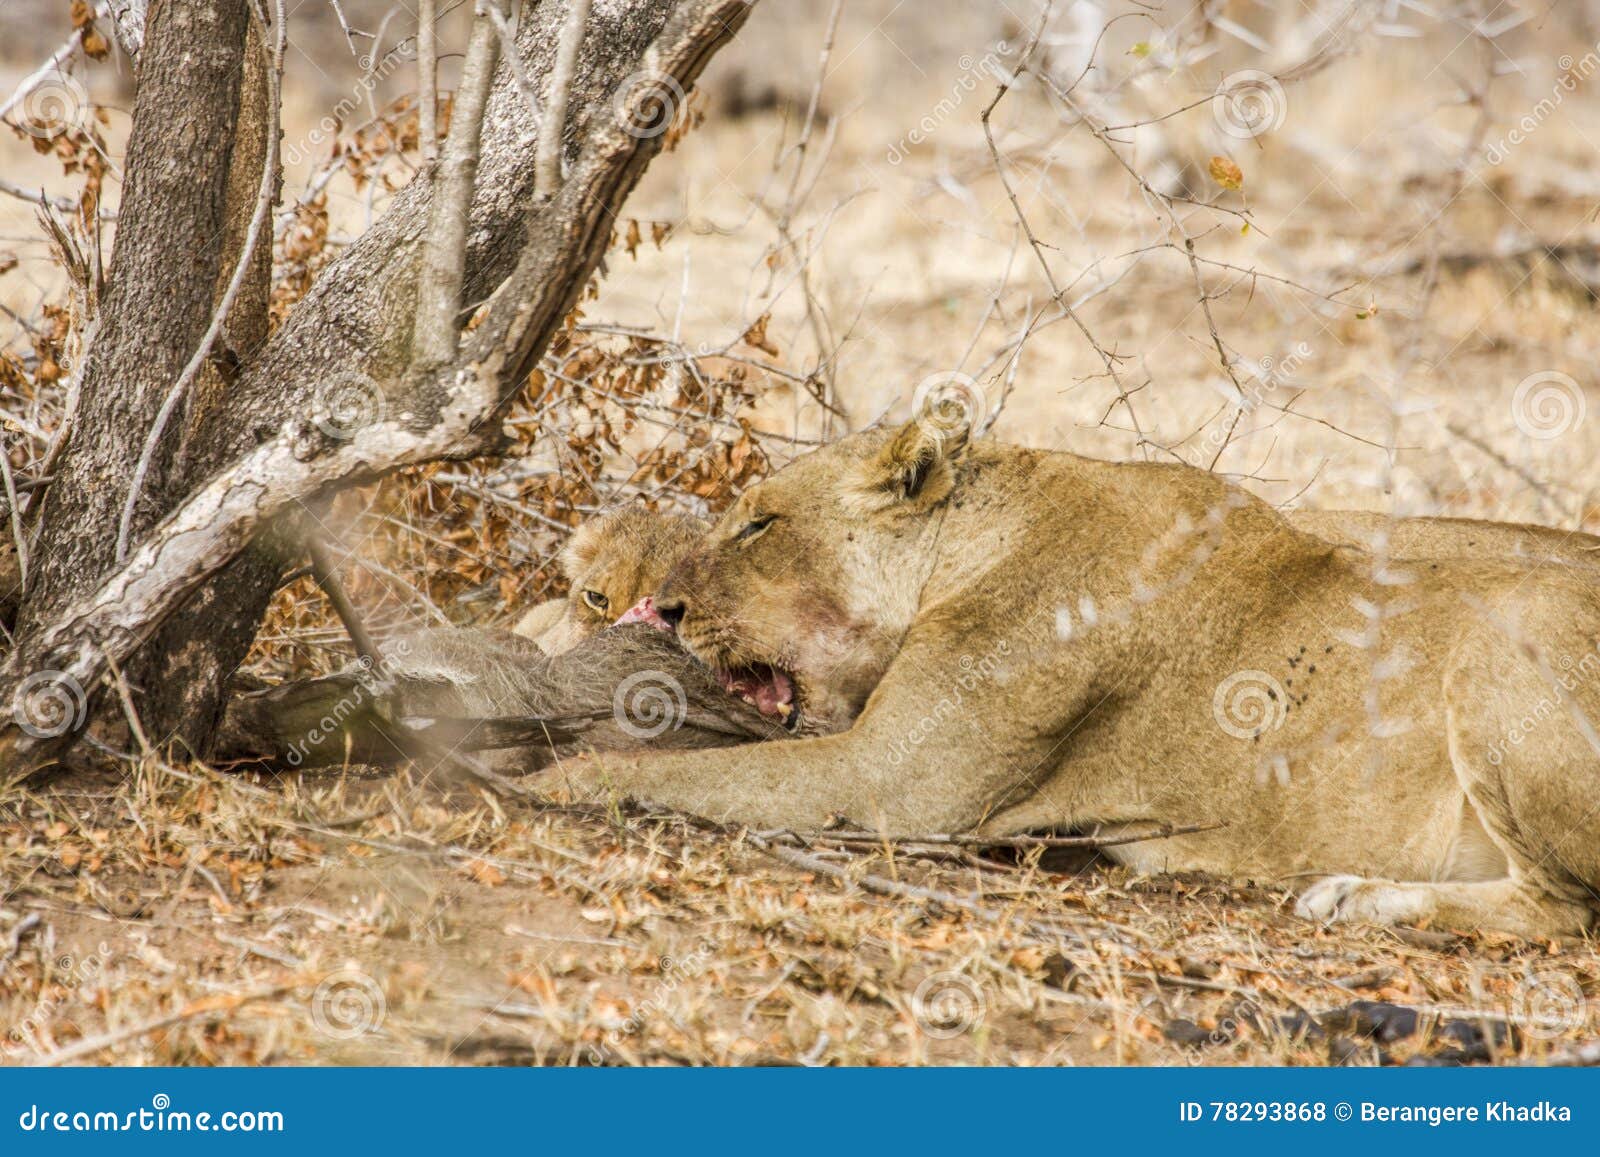 Female Lion And Baby Eating A Warthog In Kruger Park South Africa Stock Photo Image Of Mozambique South